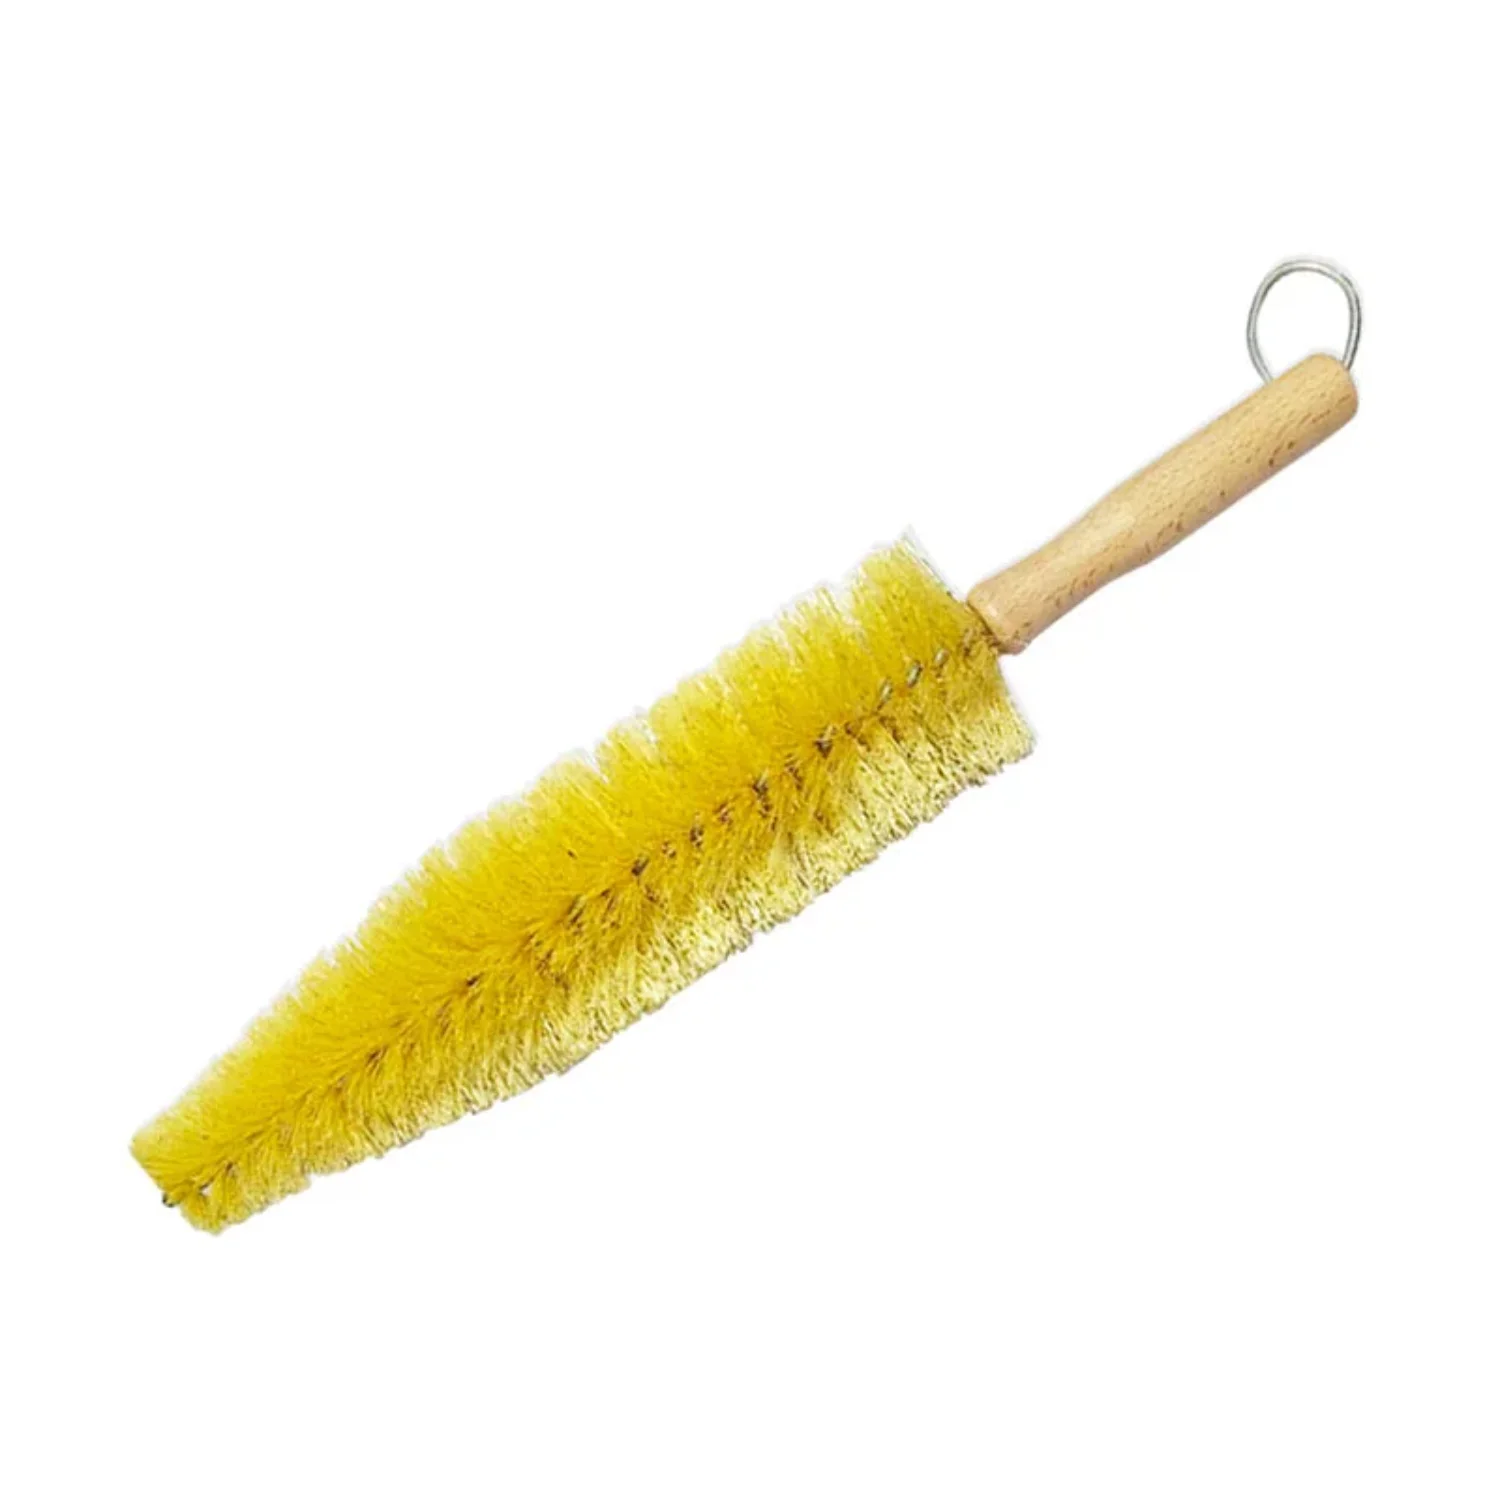 DETAILMAX® Horse Hair Extreme Soft Cleaning Brush -Big Size 